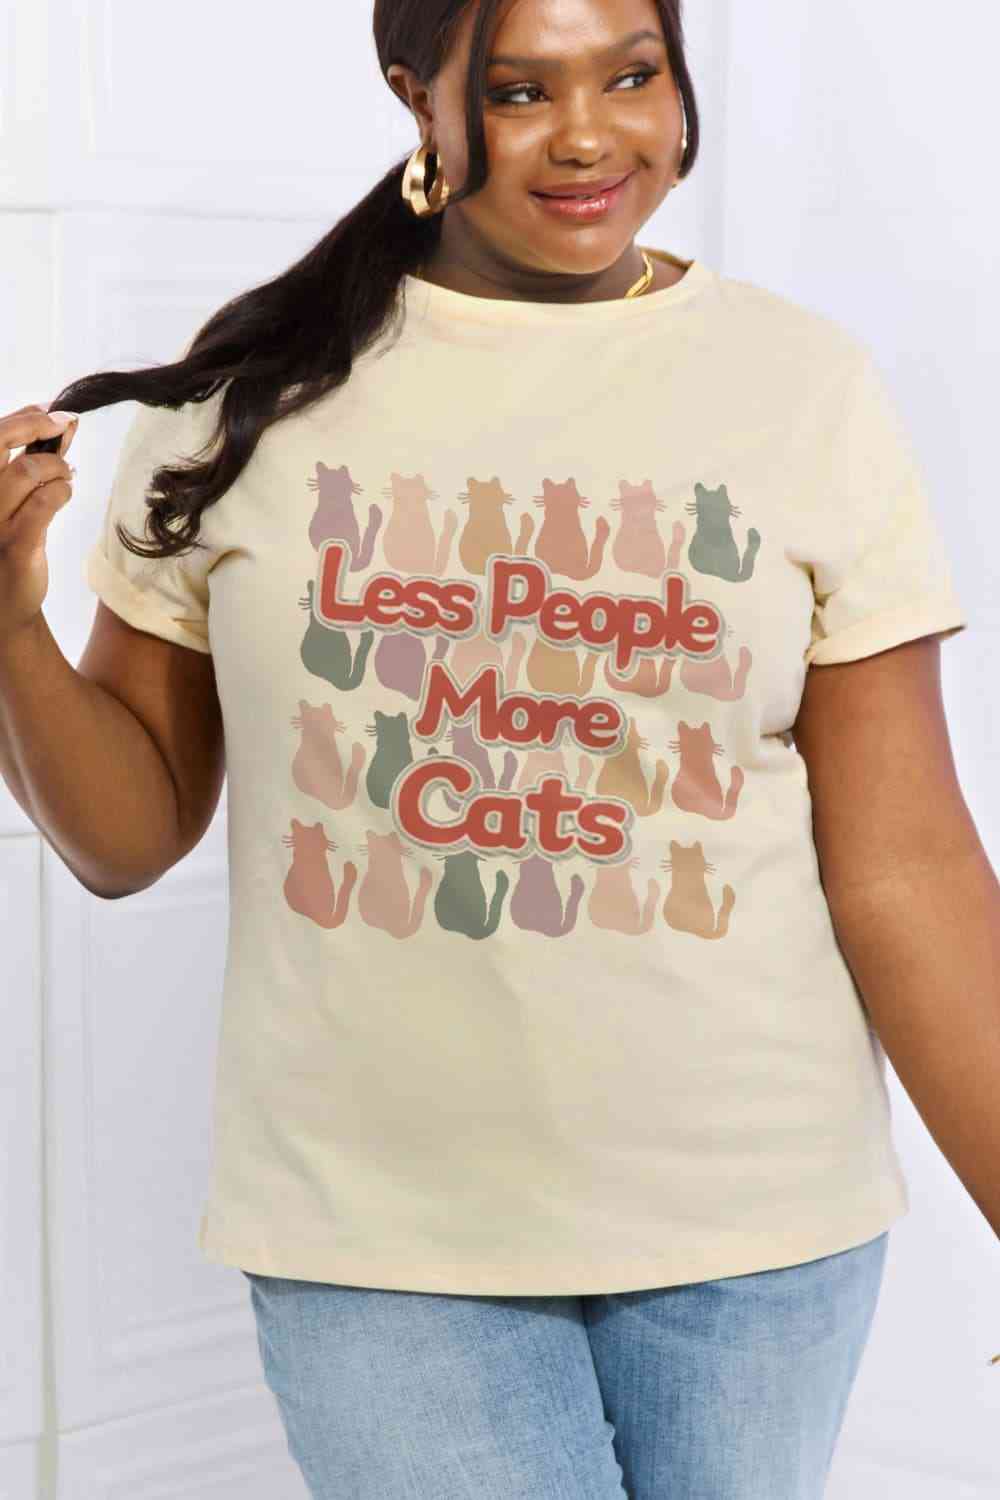 Simply Love Full Size LESS PEOPLE MORE CATS Graphic Cotton Tee - TRENDMELO